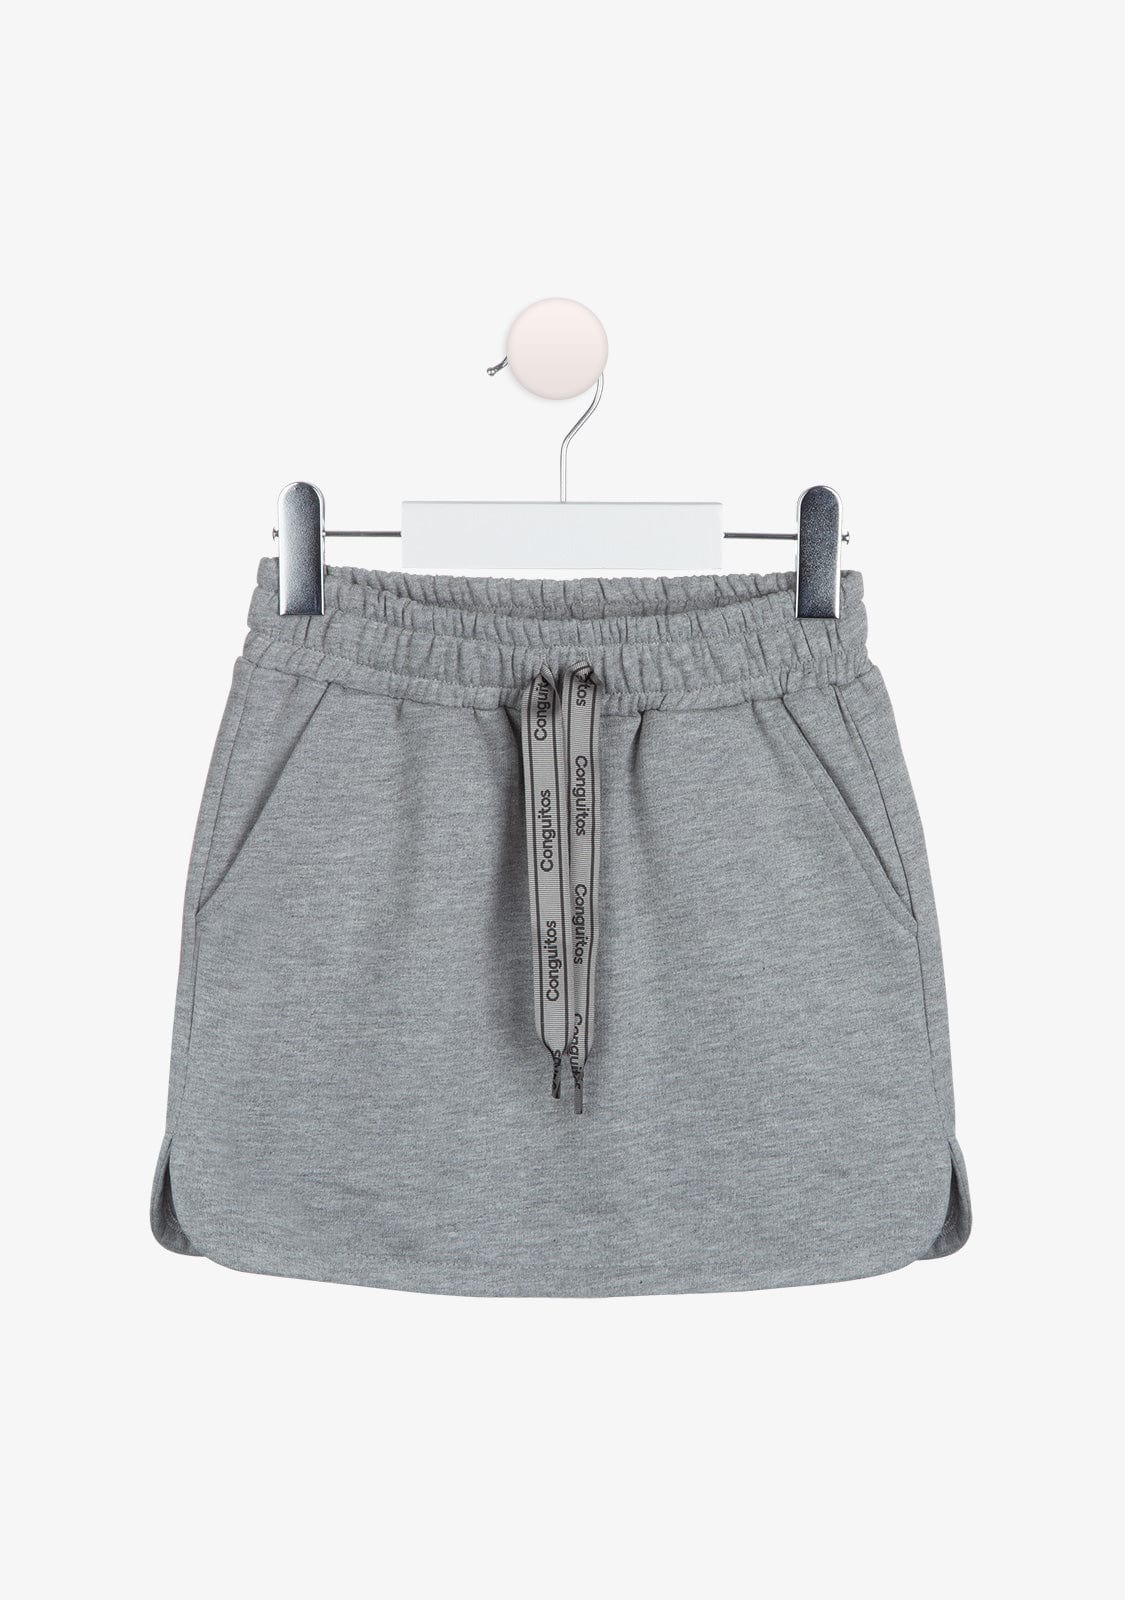 CONGUITOS TEXTIL Clothing Girl's Grey Sports Skirt